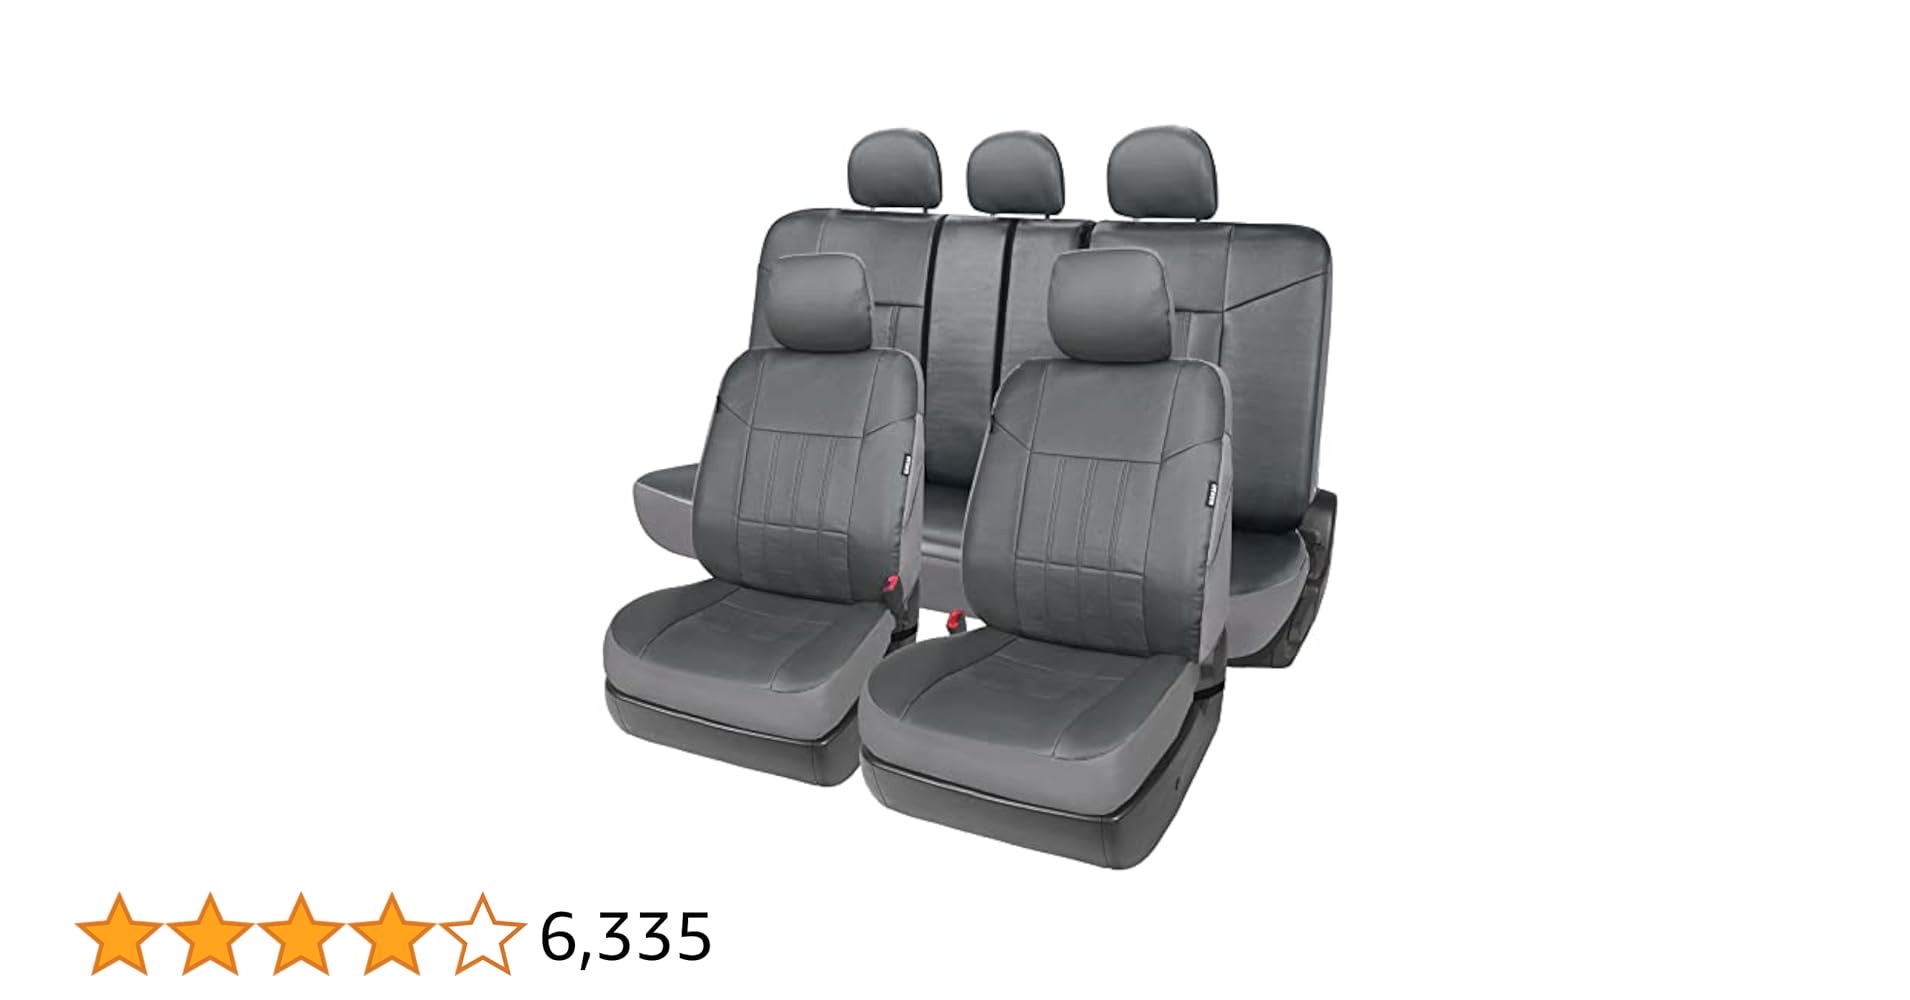 Leader Accessories 17pcs Leather Grey Auto Car Seat Covers Combo Pack for Cars SUV - Front Seats Set and 50/50 or 60/40 Rear Split Bench